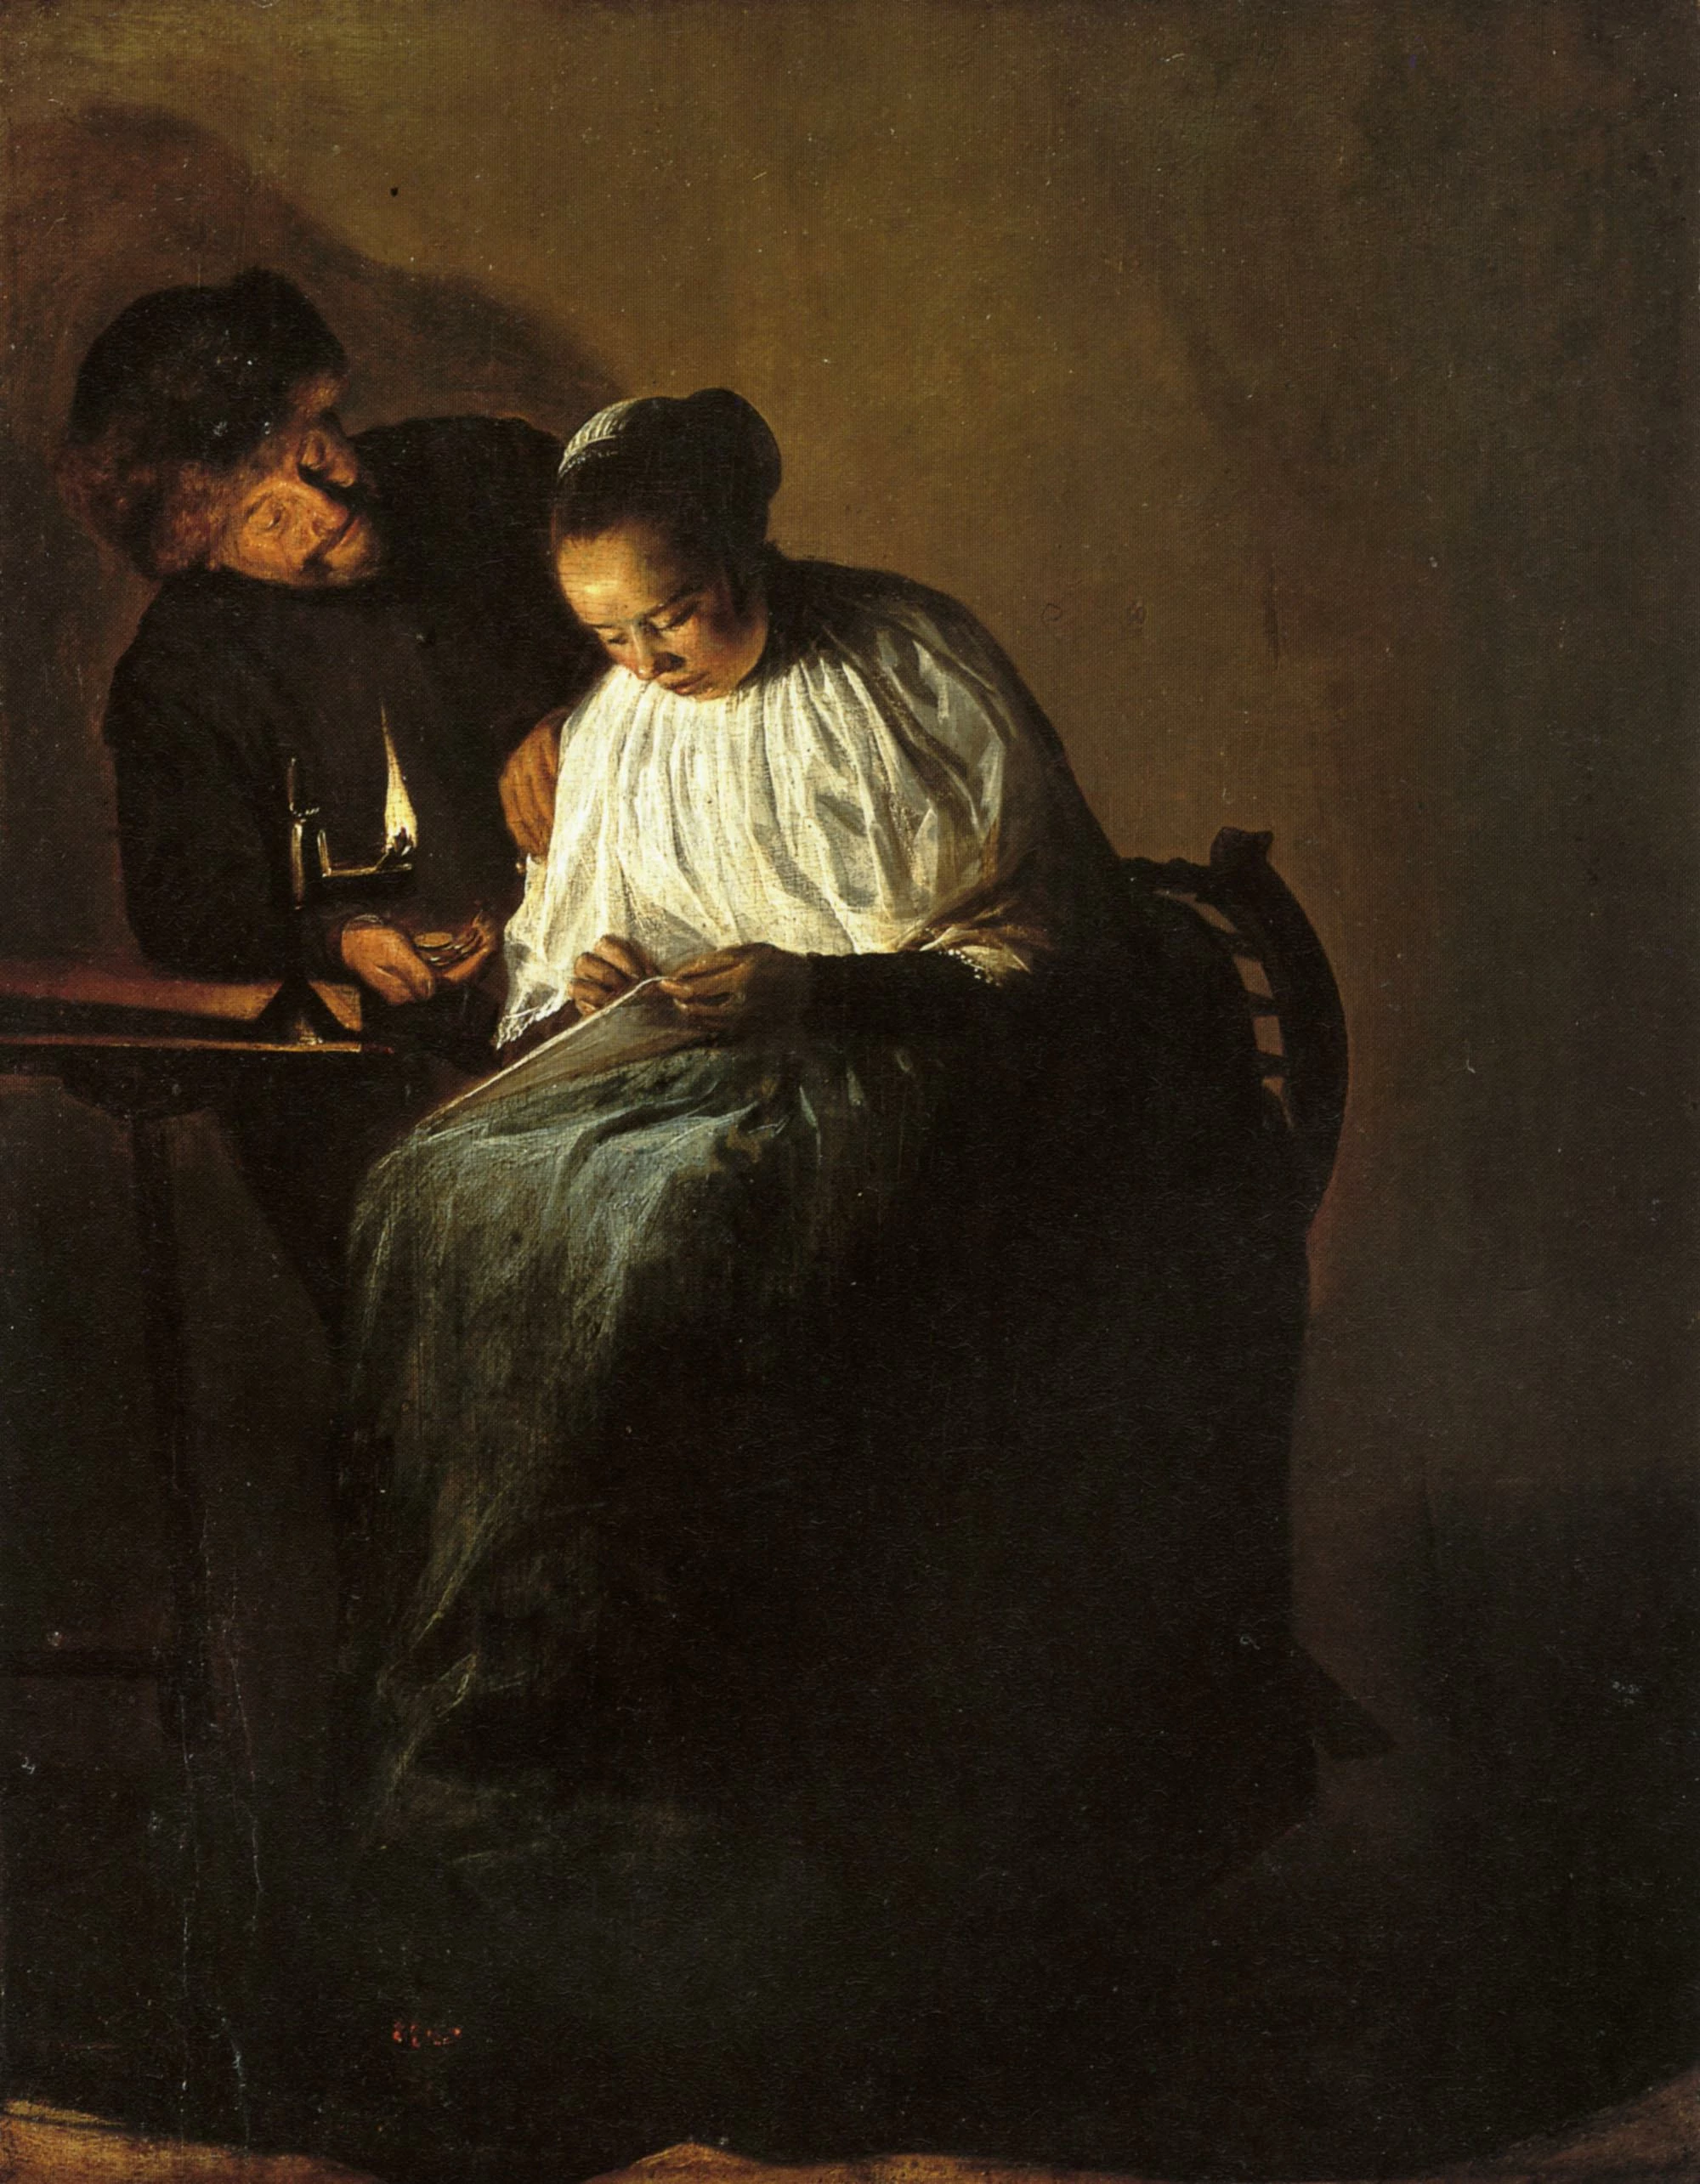 The Proposition, Judith Leyster